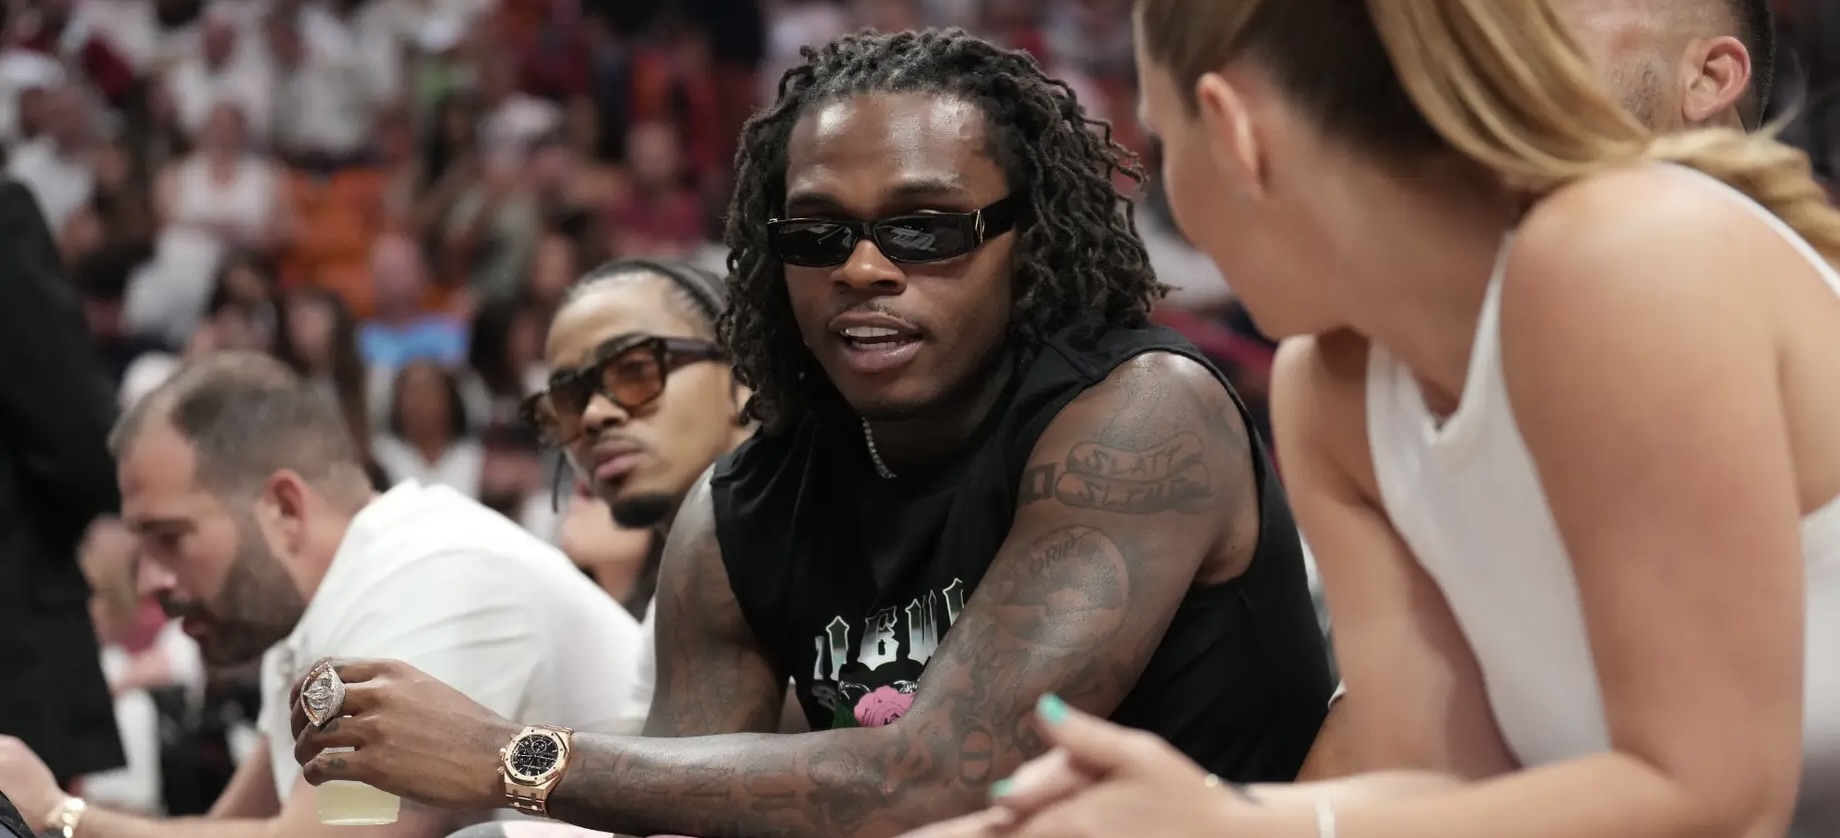 Gunna Calls for Young Thug’s Release During First Post-Jail Performance: ‘Free Jeffery’ [Video]